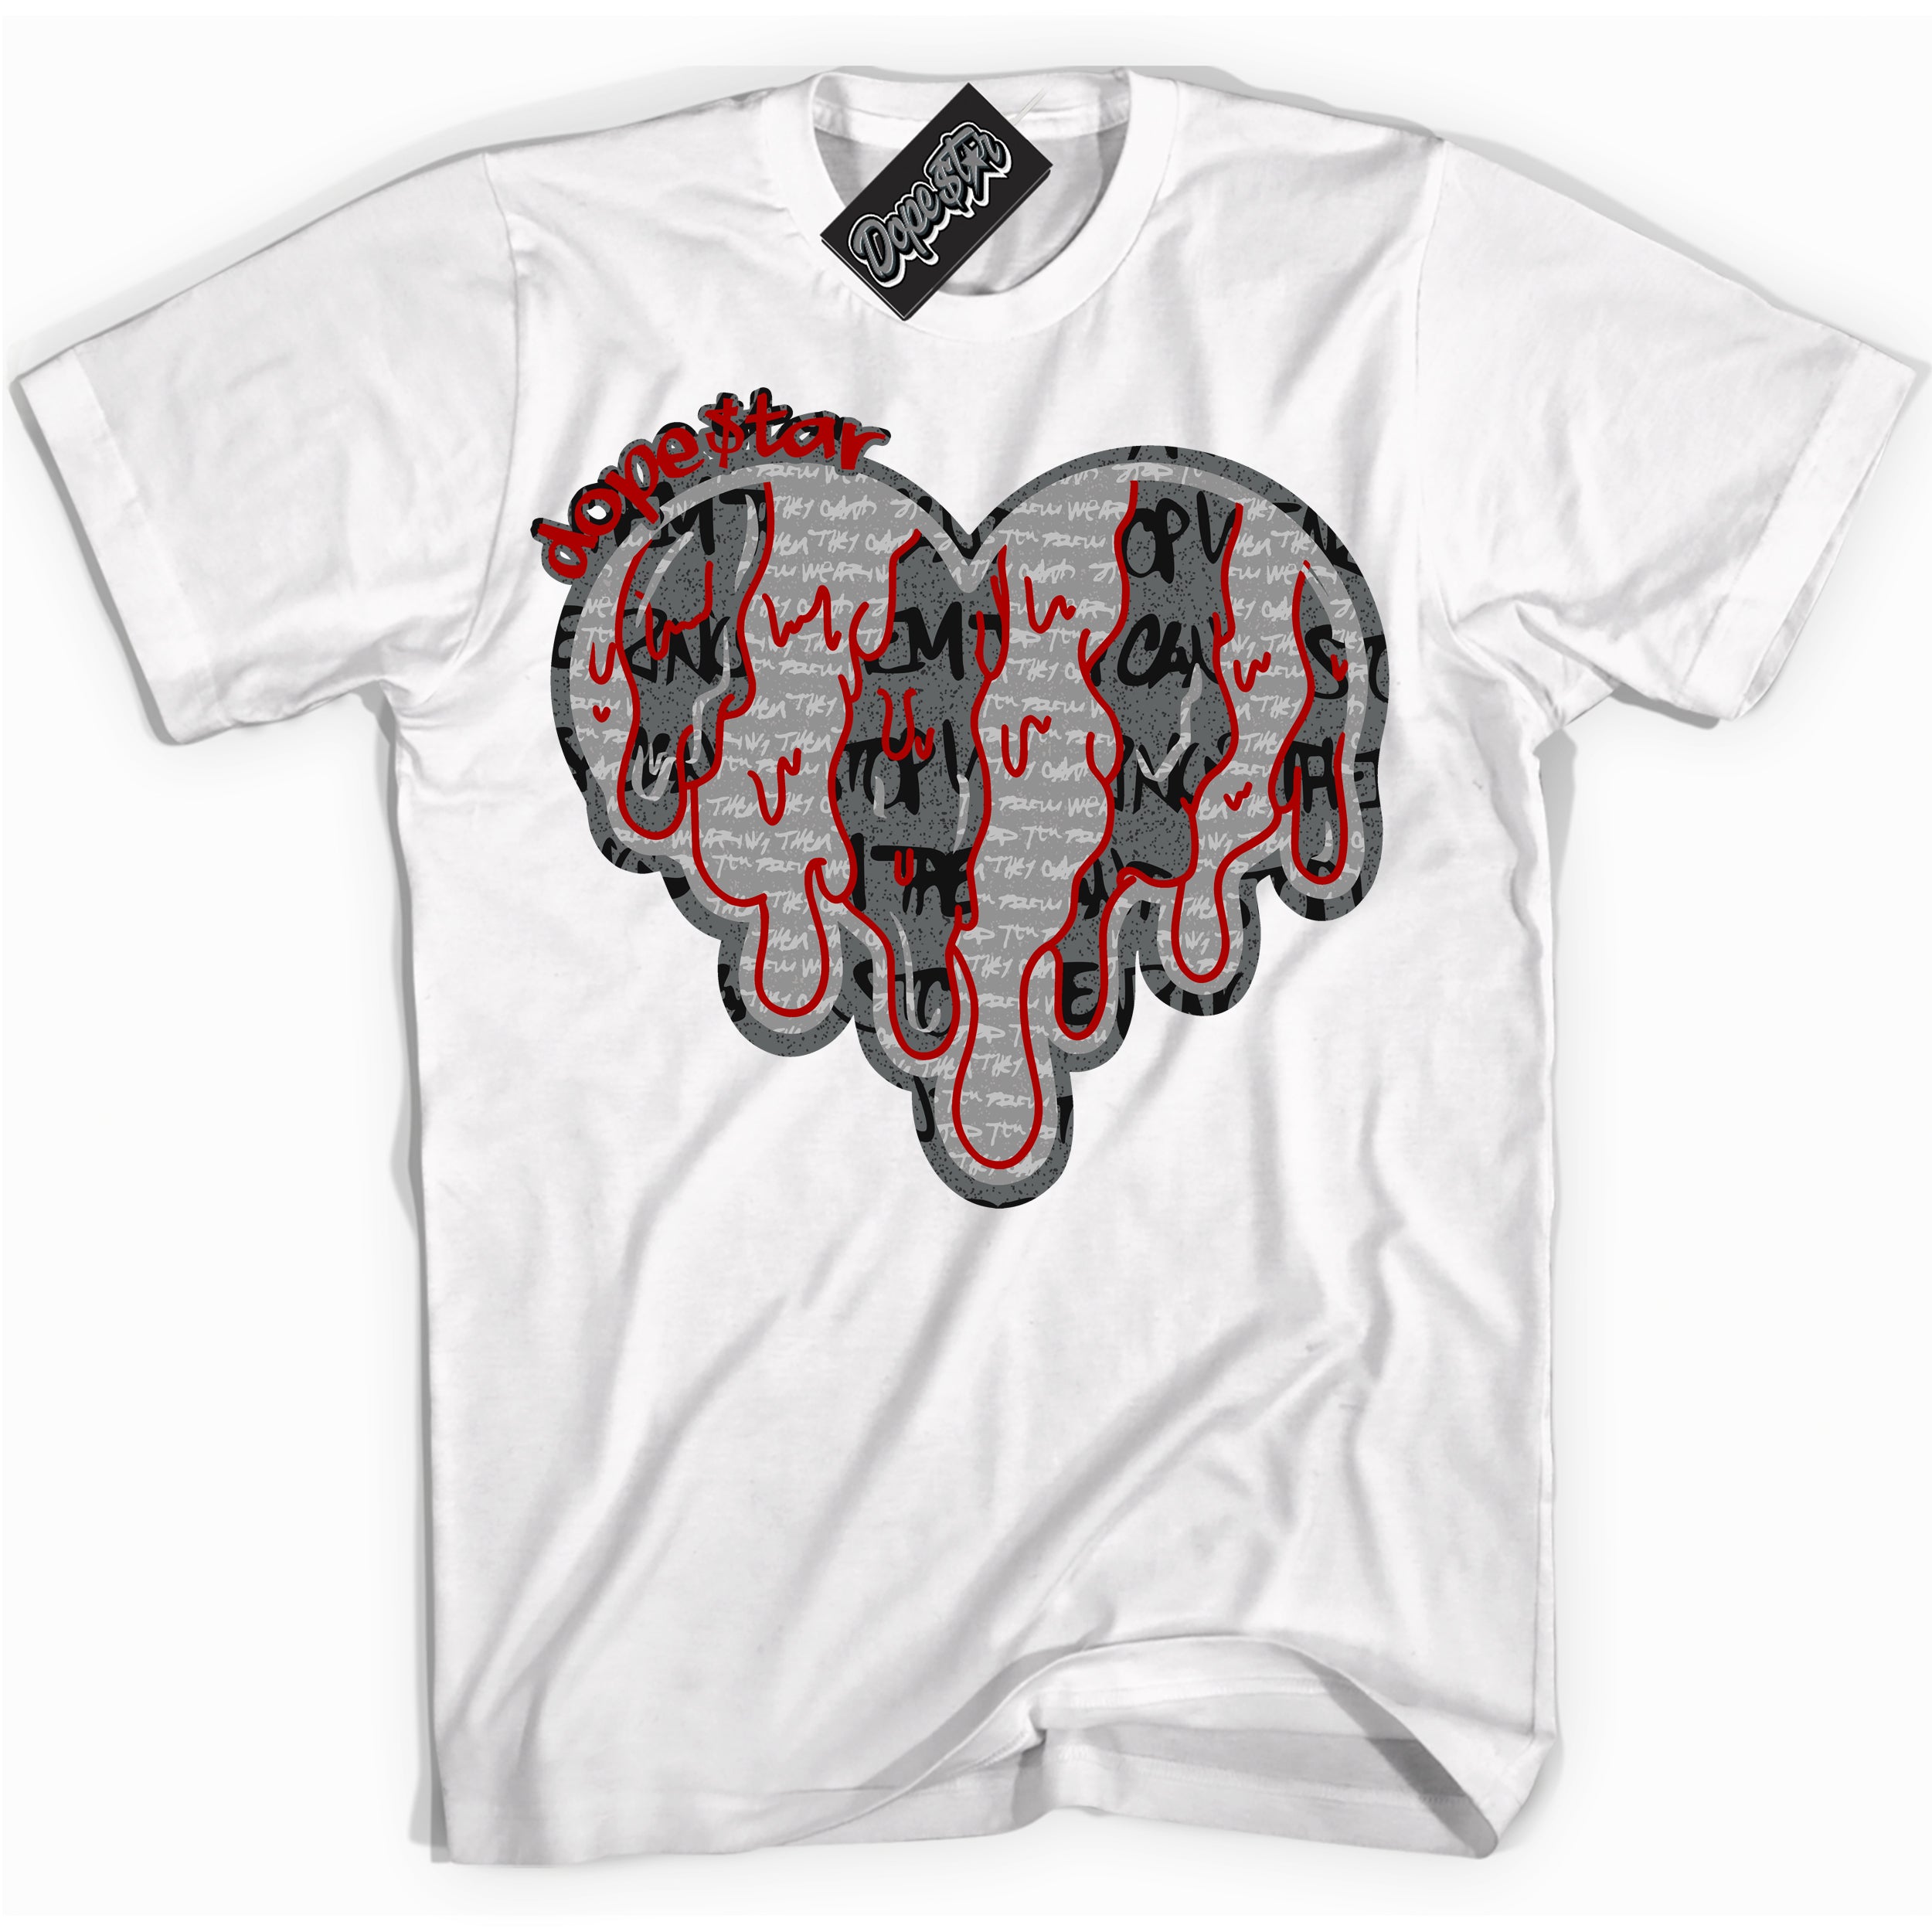 Cool White Shirt with “ Melting Heart ” design that perfectly matches Rebellionaire 1s Sneakers.